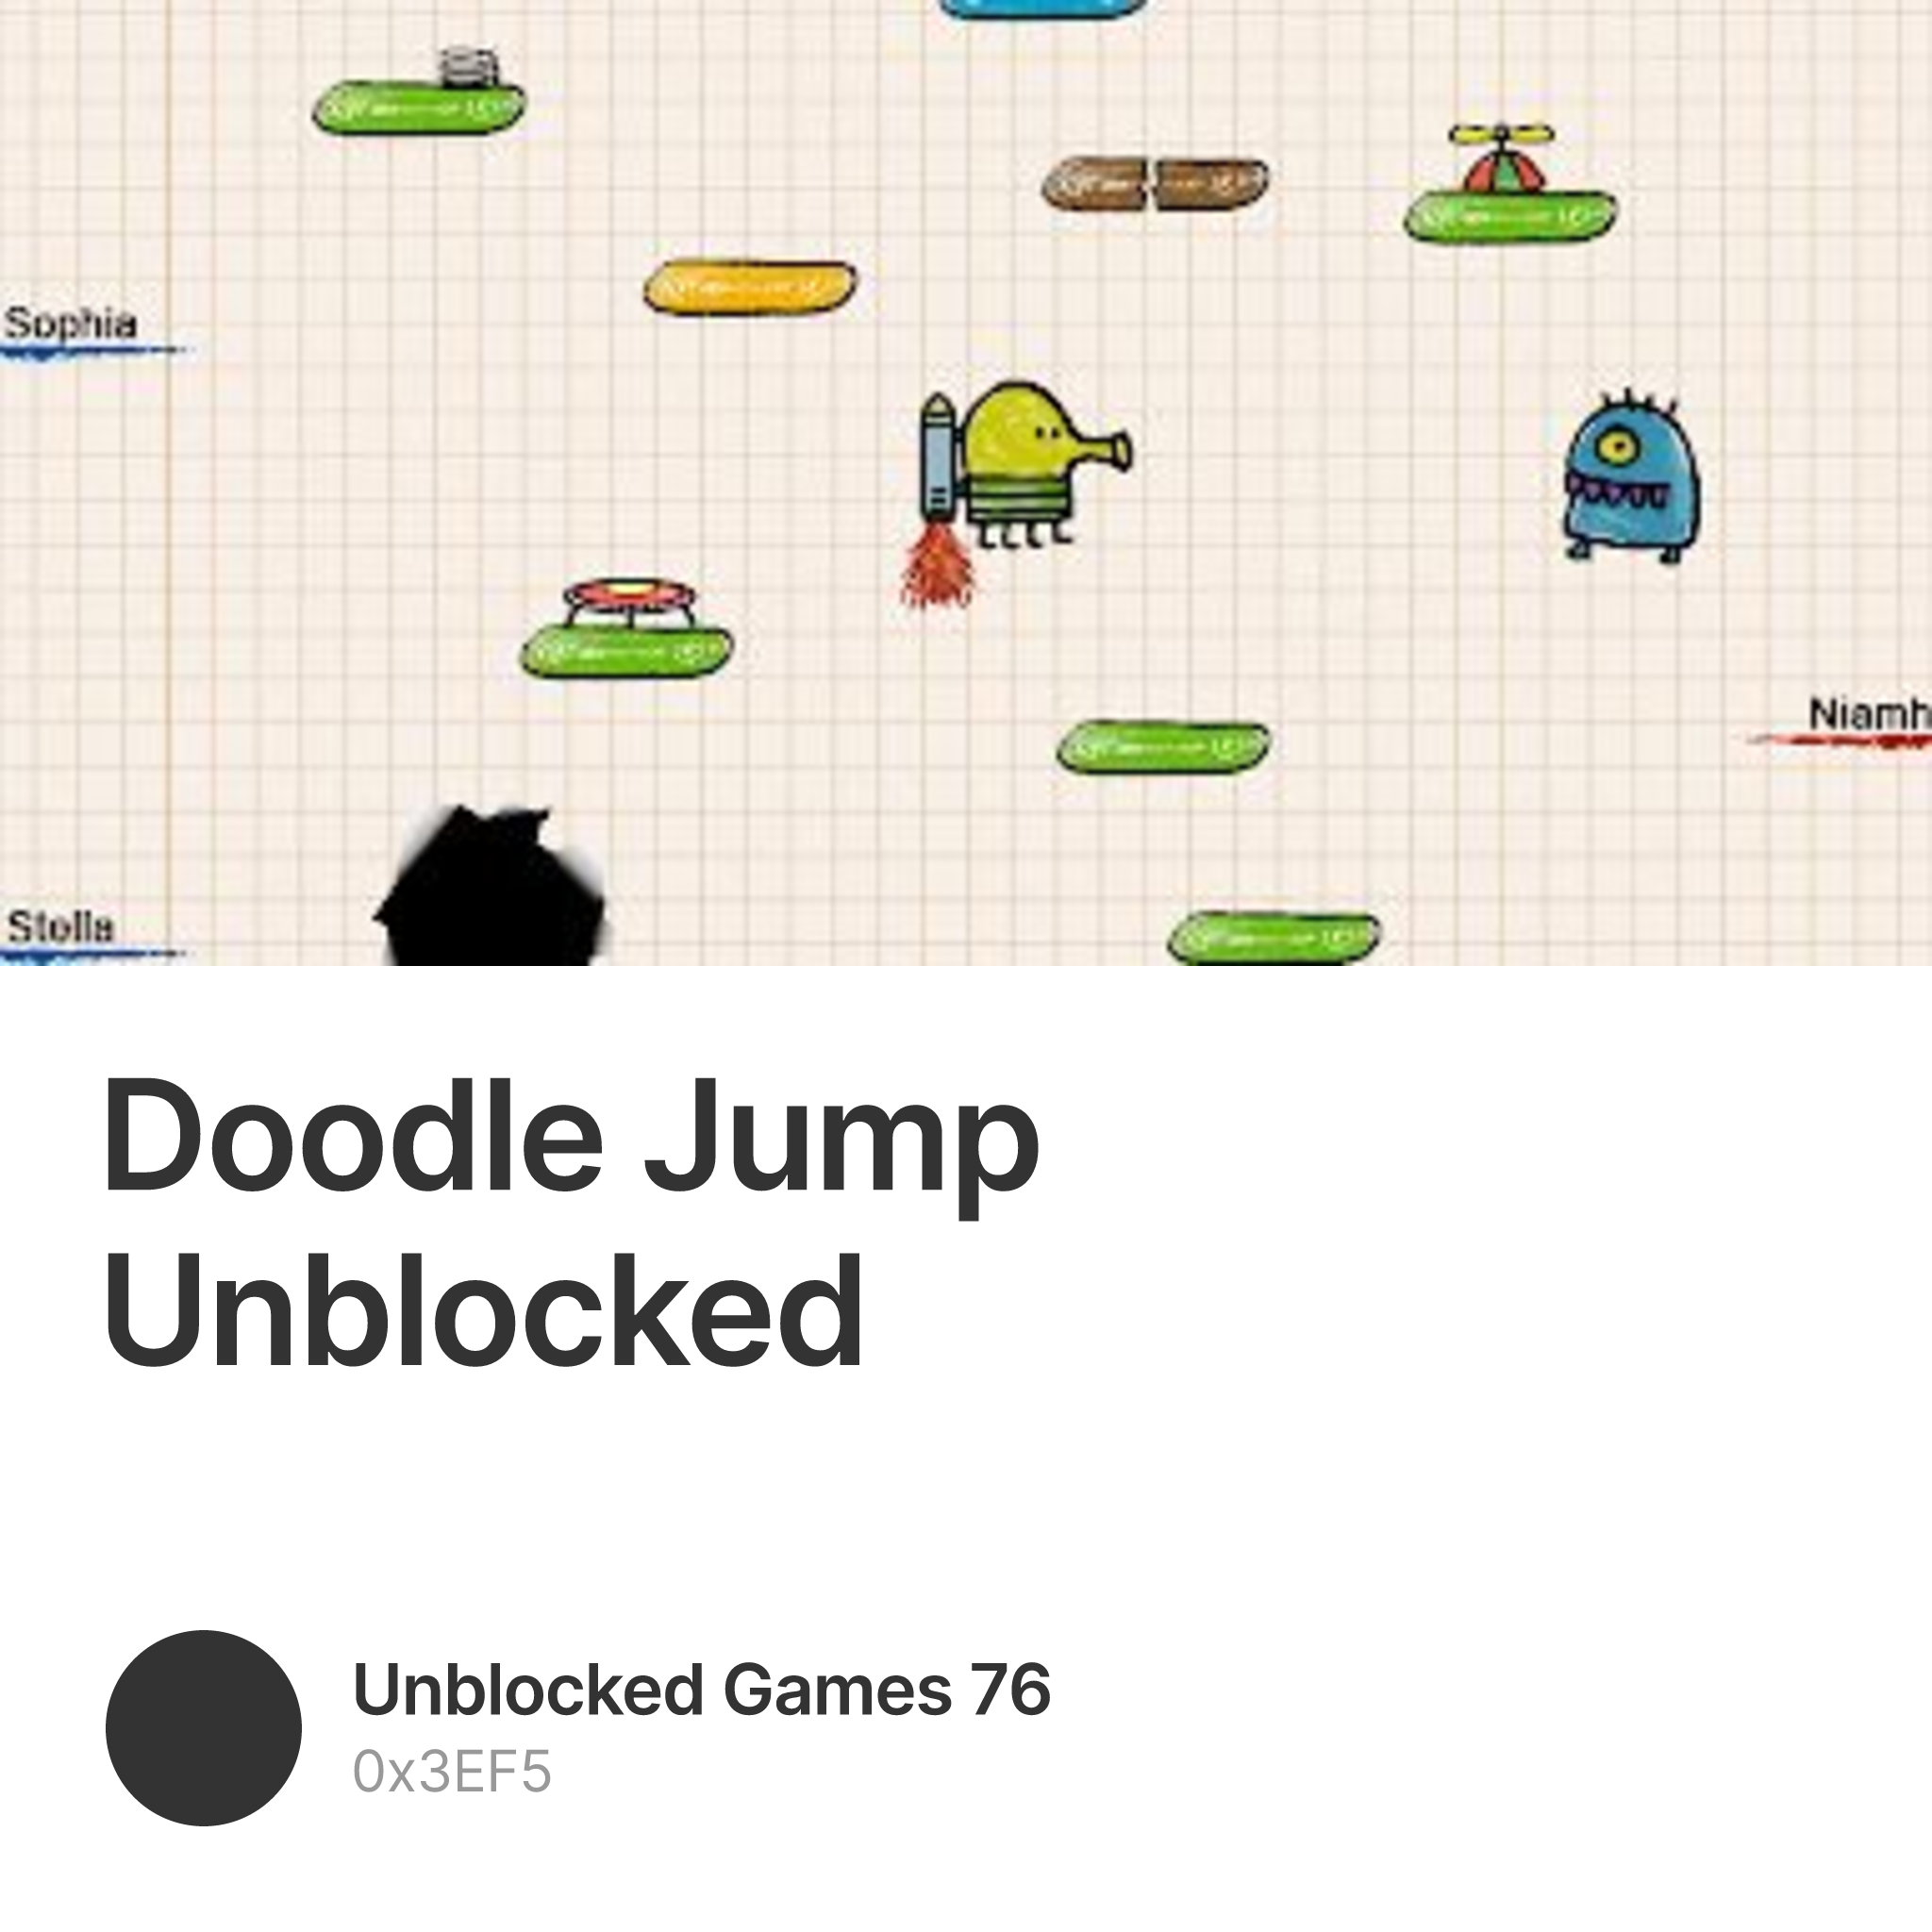 Play Free Online Doodle Jump Game At Unblocked Games